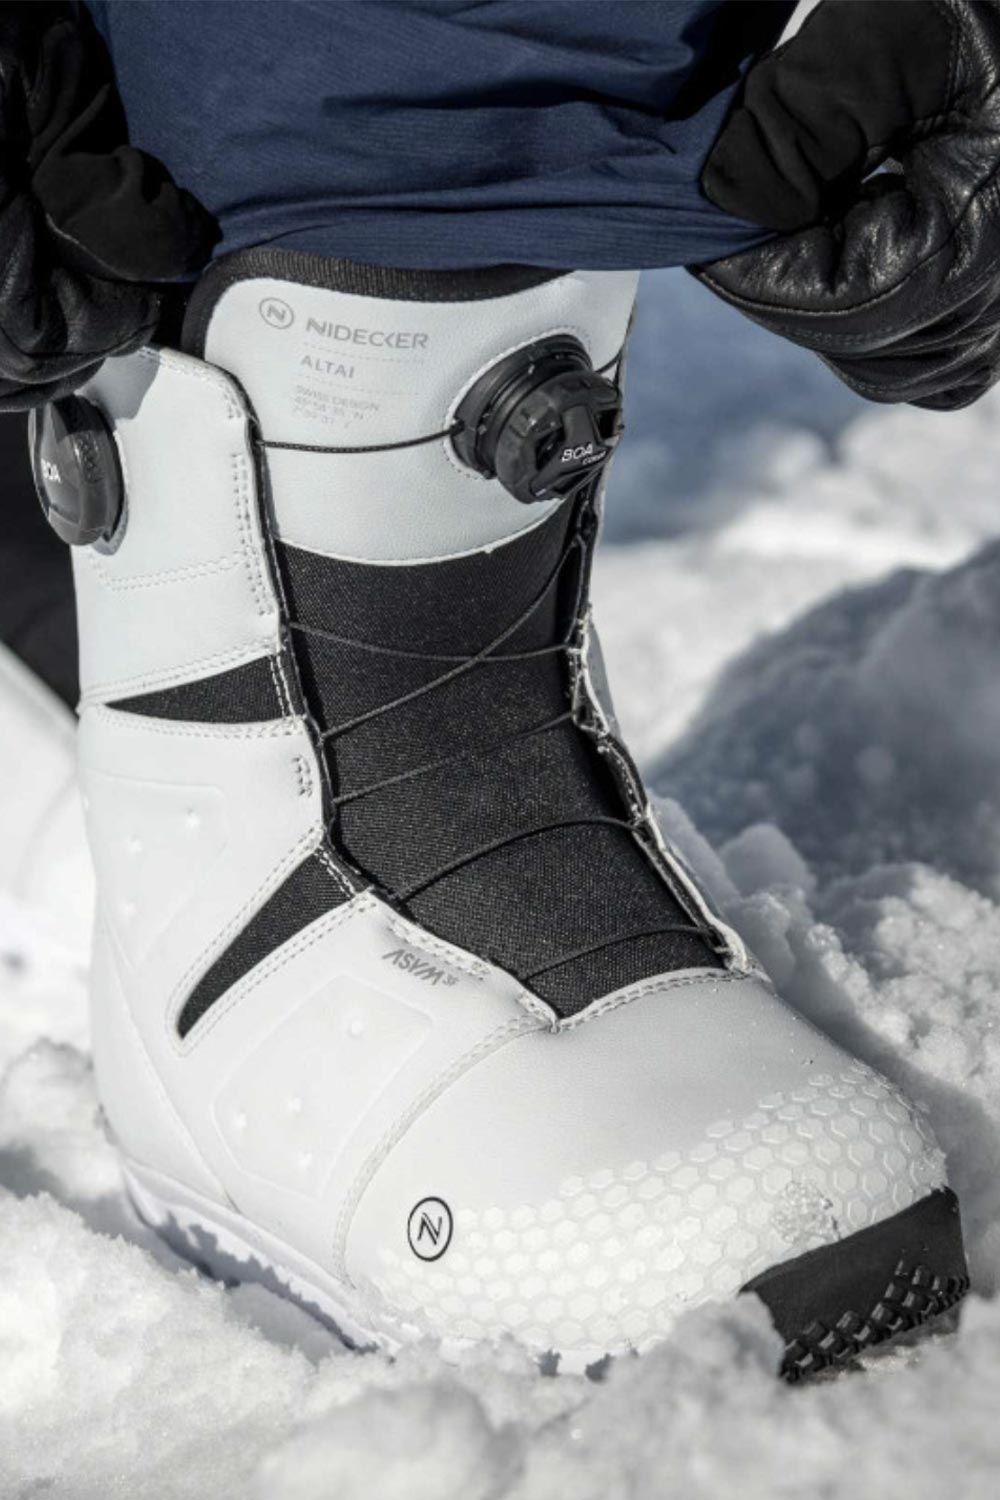 Nidecker Altai snowboard boots with BOA